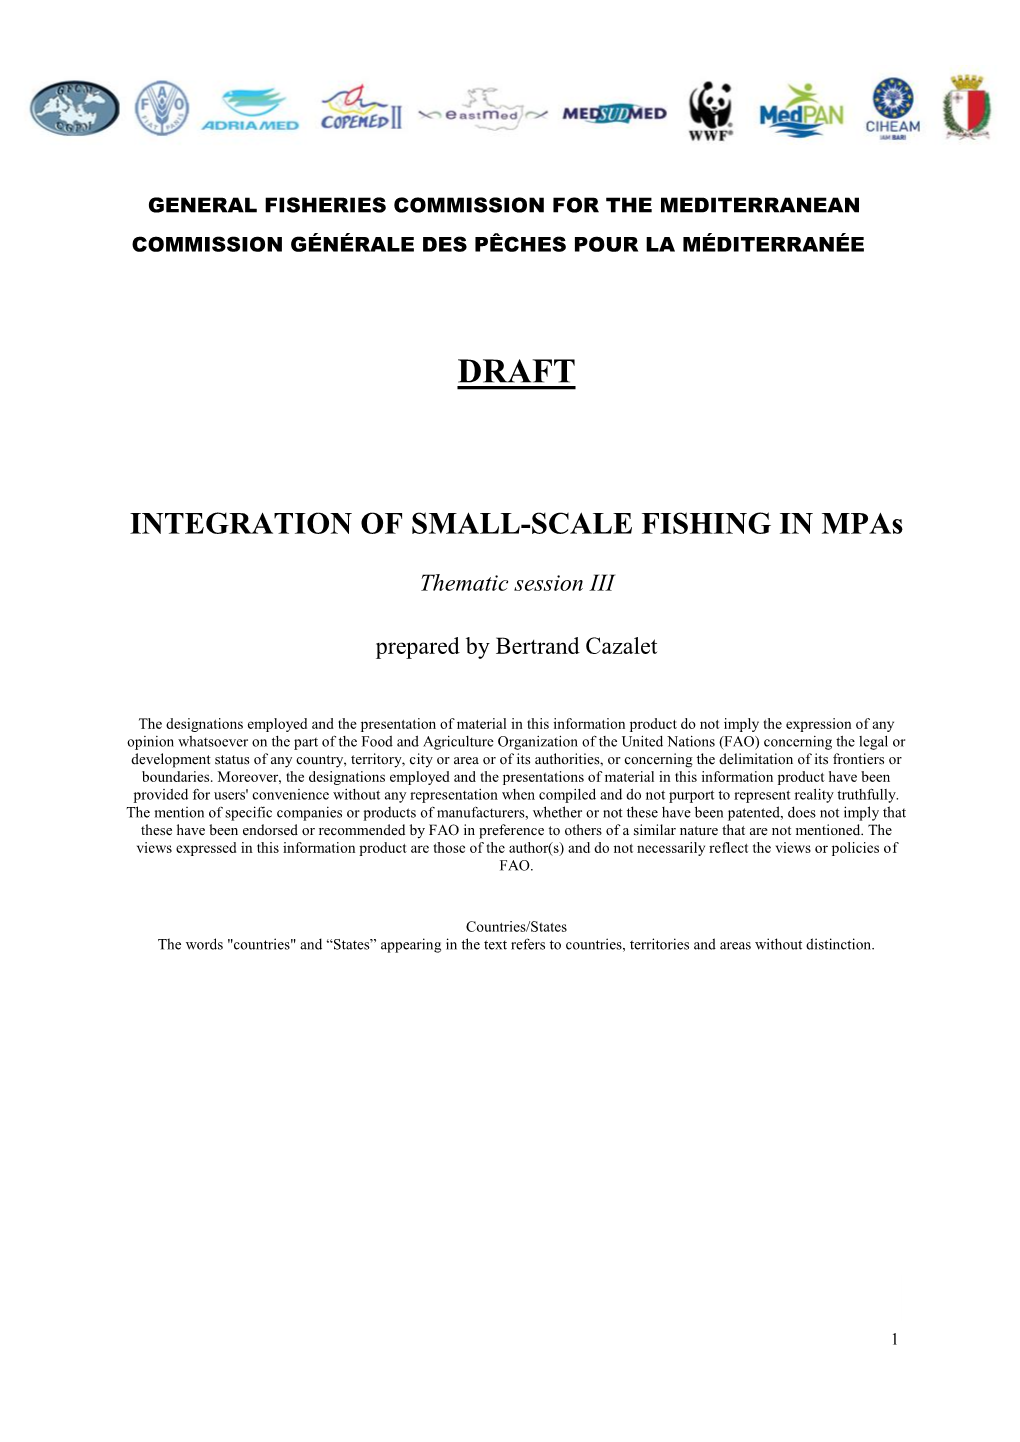 INTEGRATION of SMALL-SCALE FISHING in Mpas